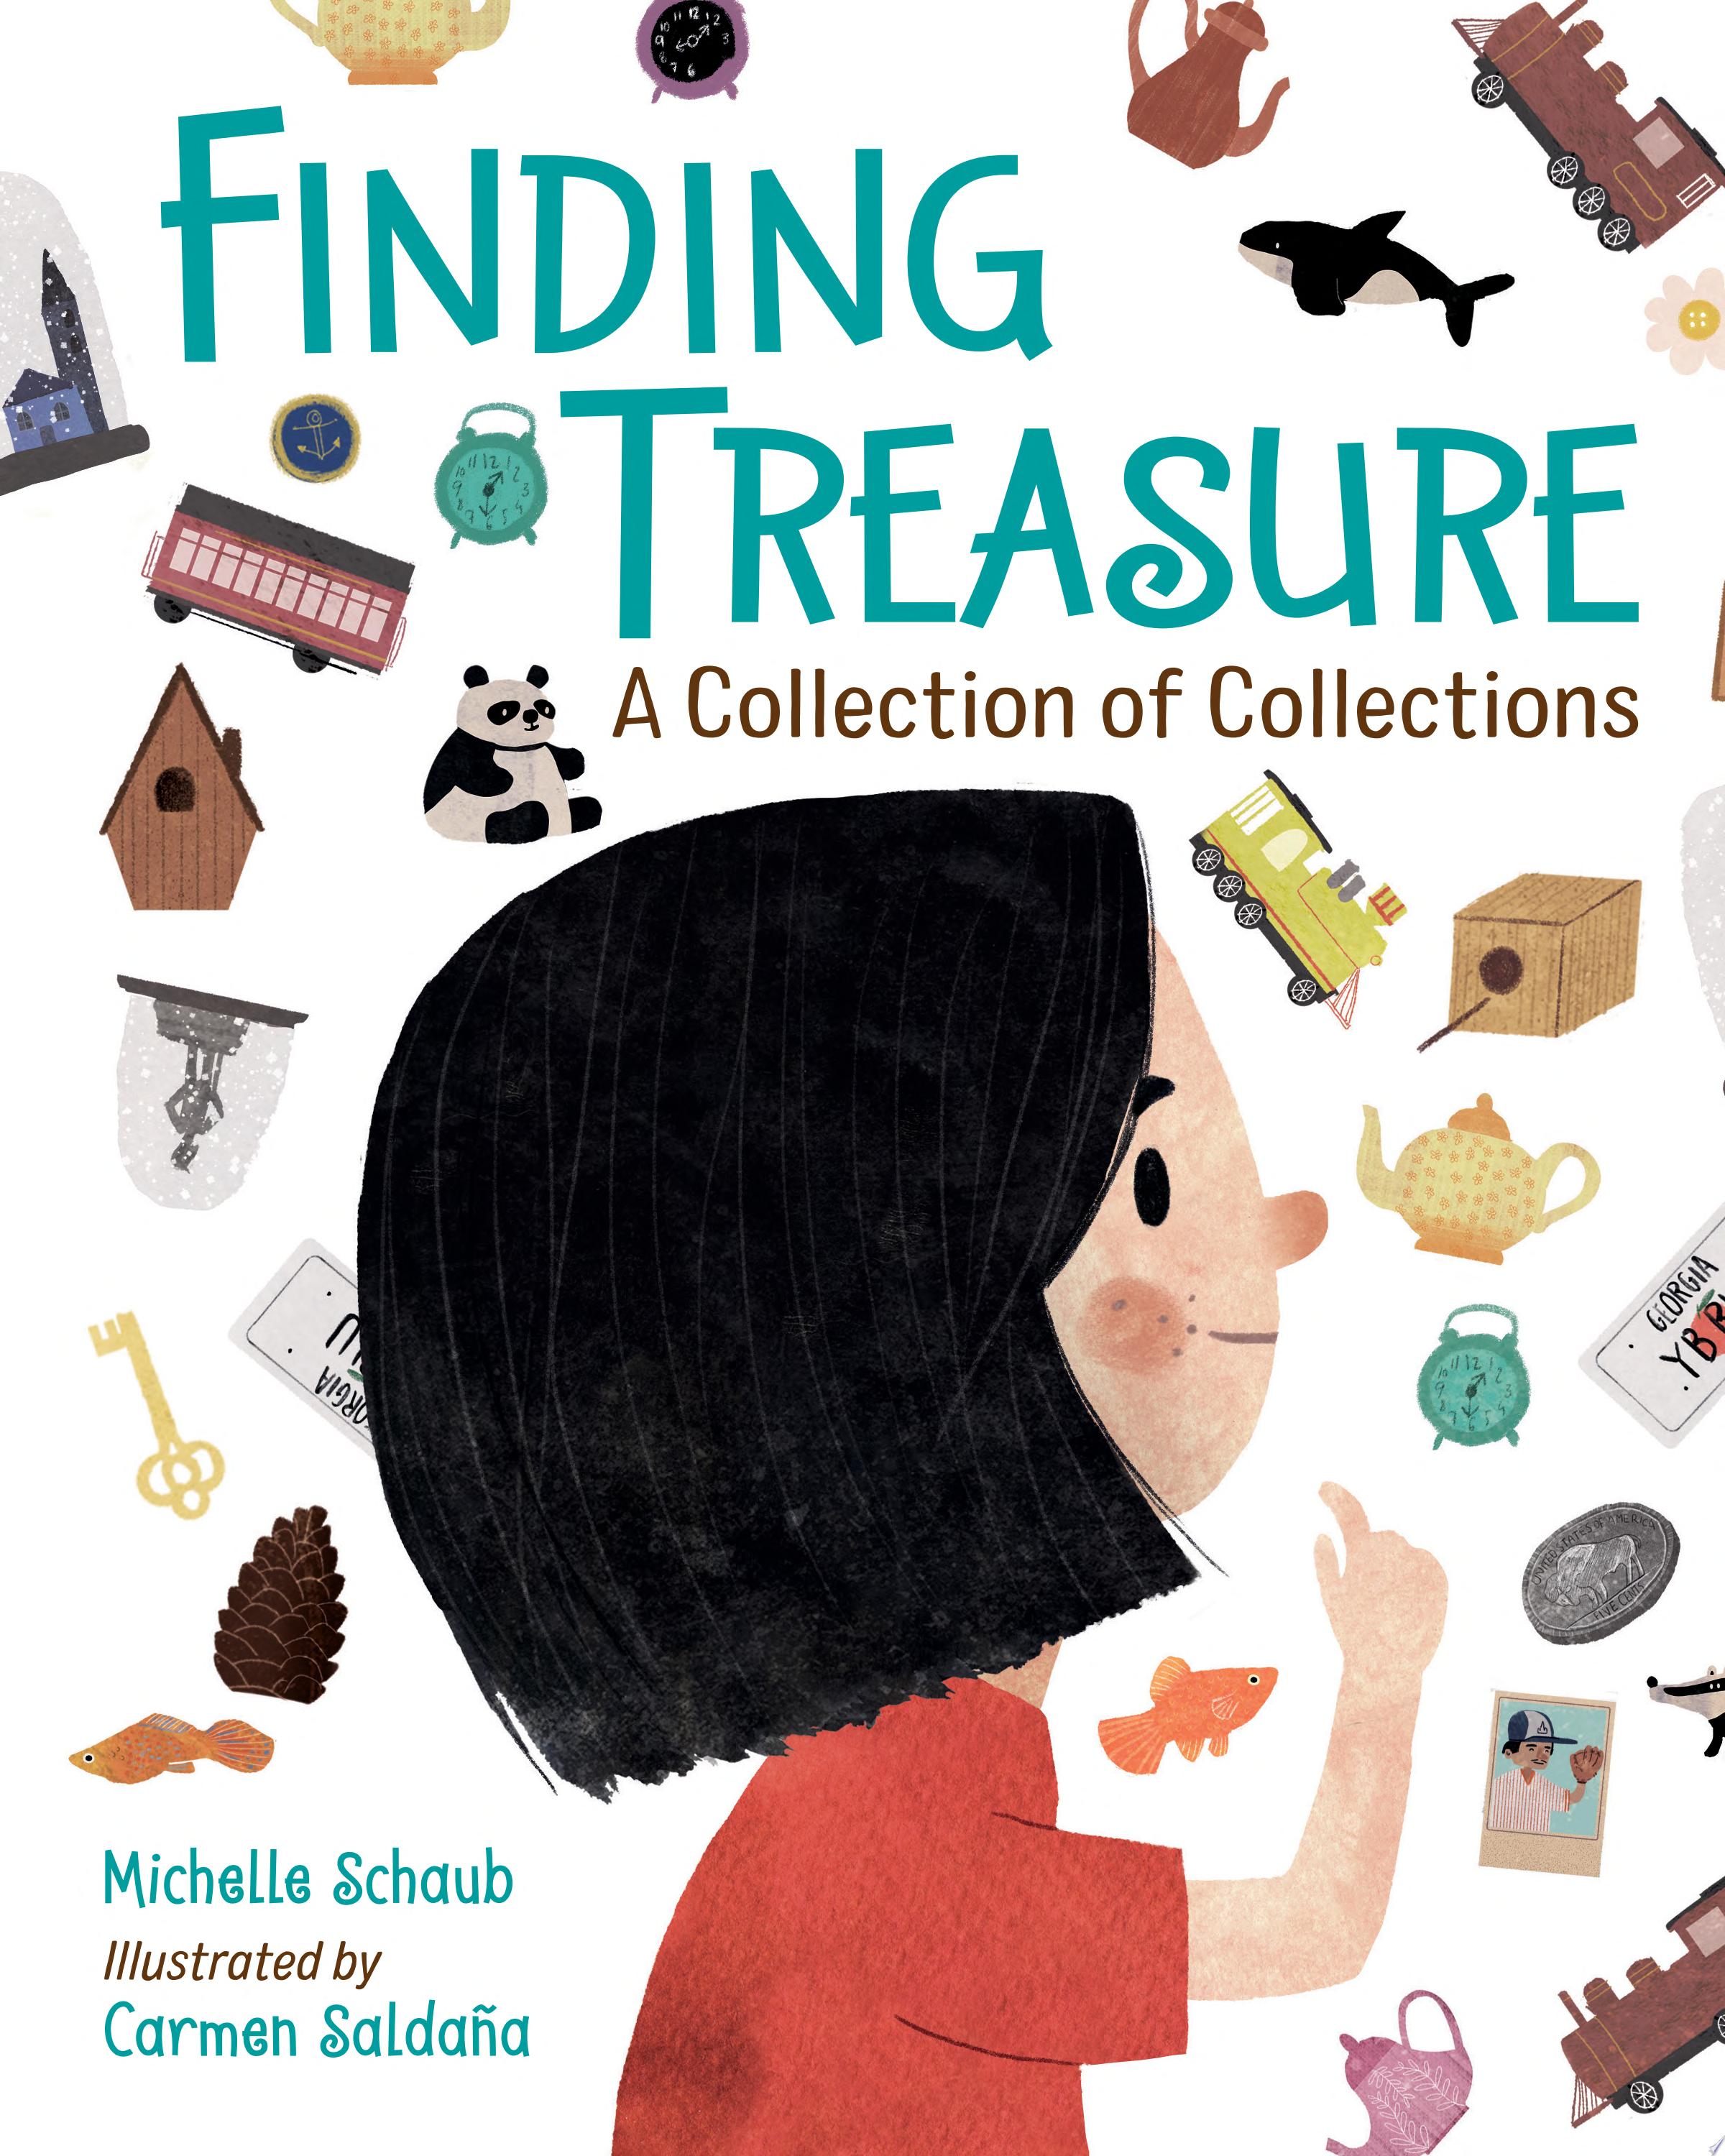 Image for "Finding Treasure"